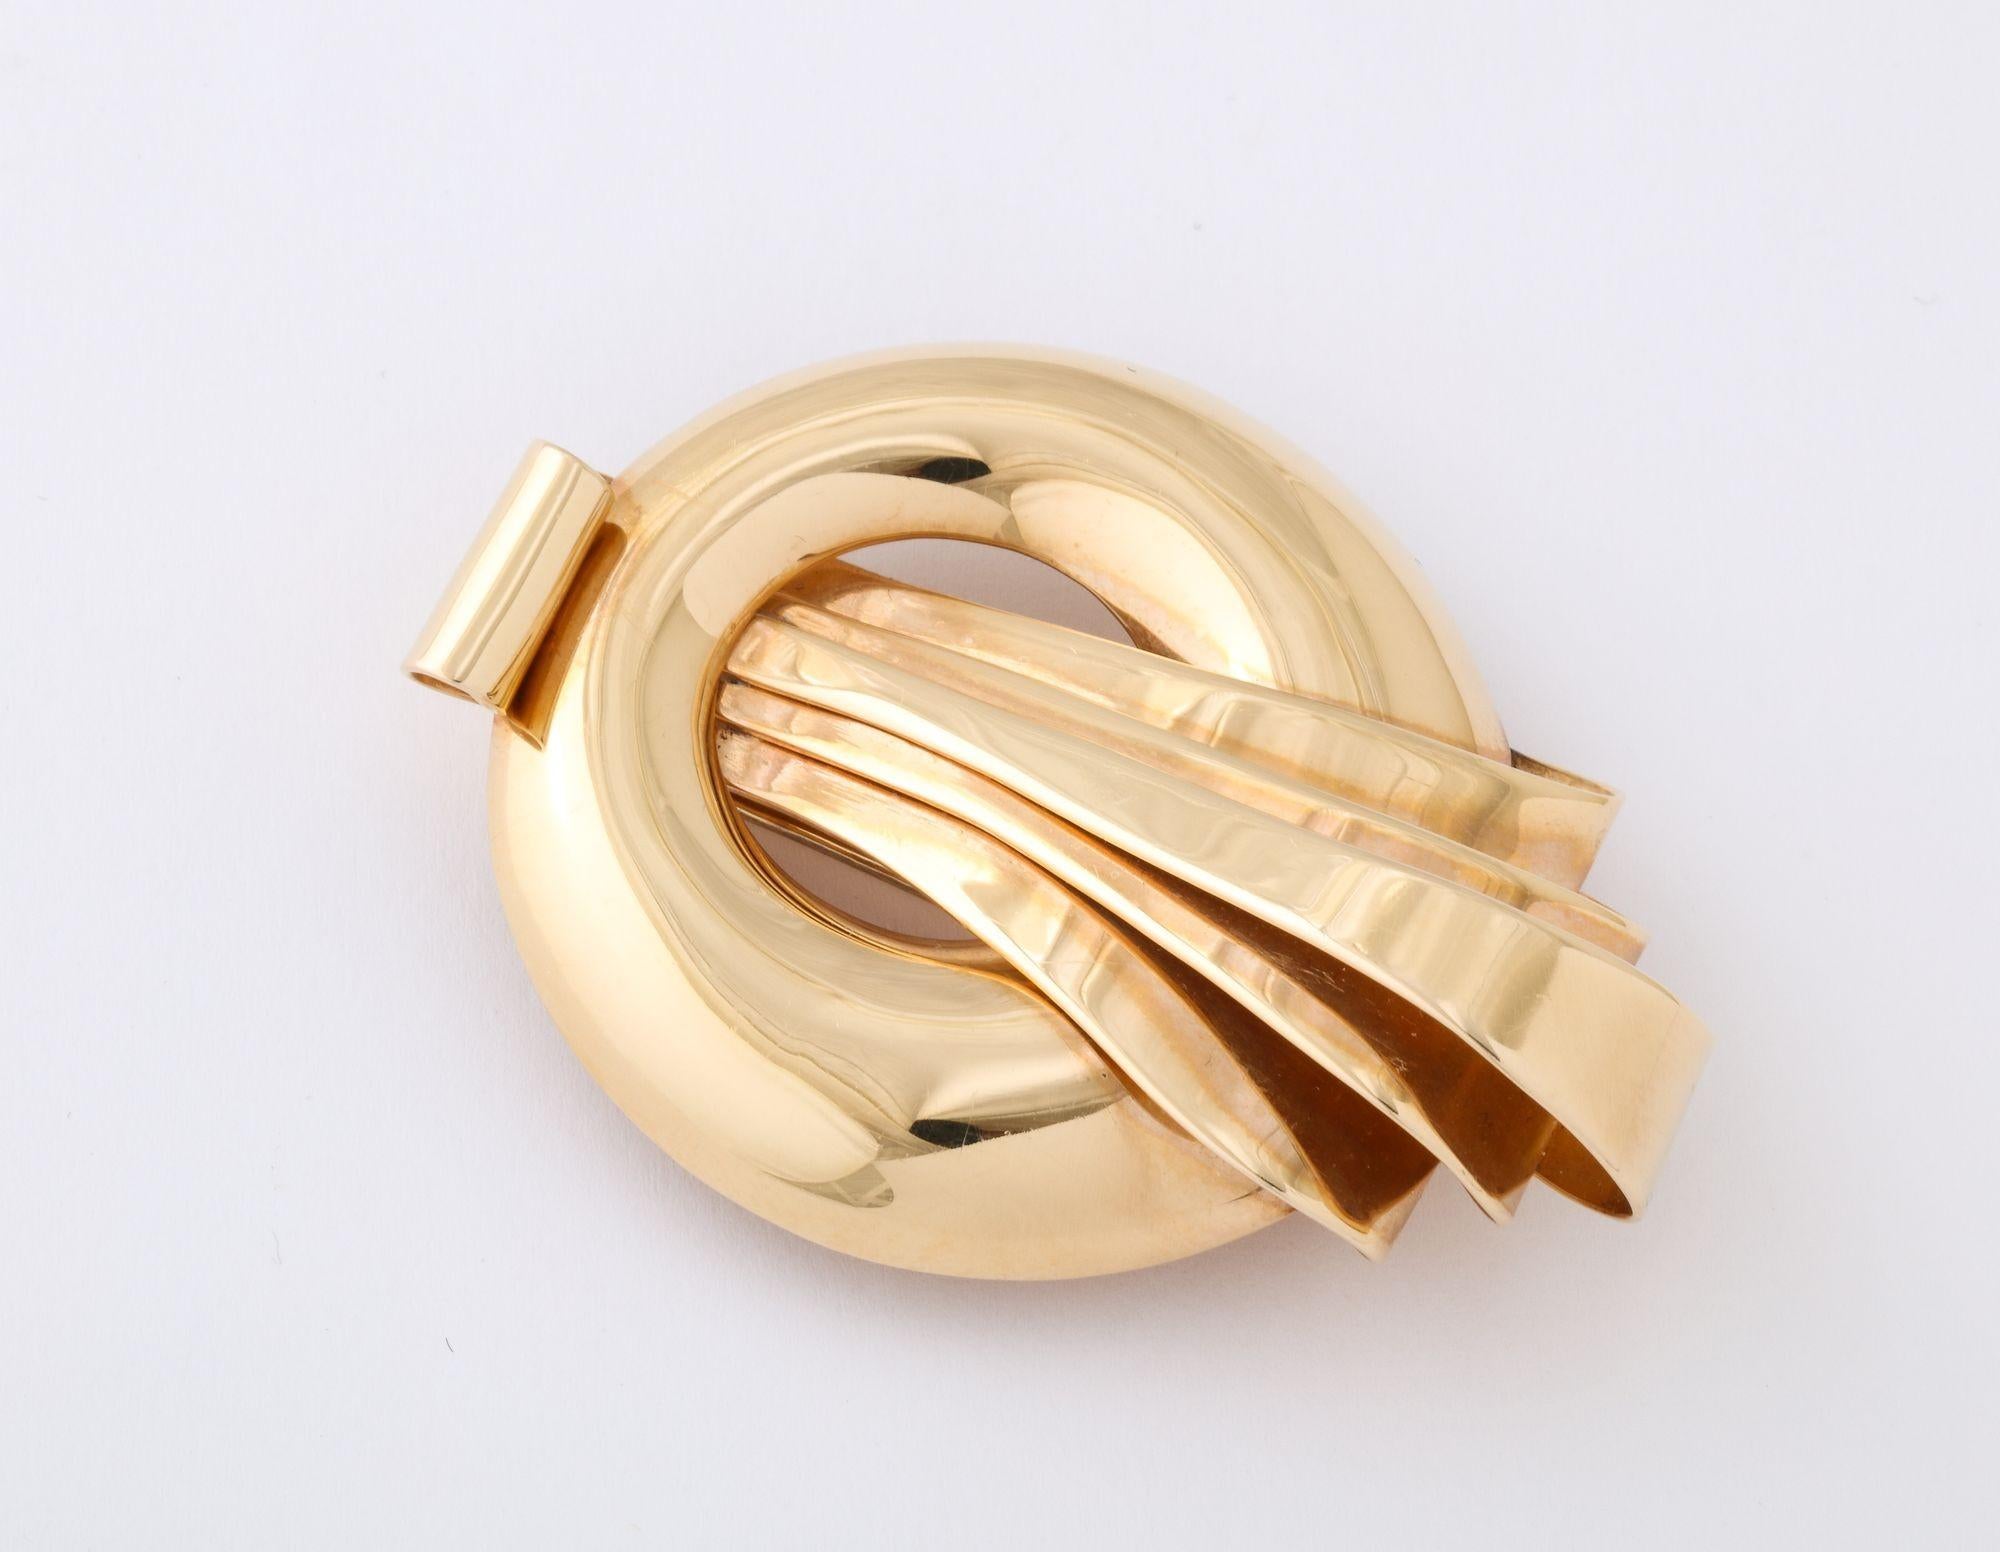 A classic French Retro Clip/ Brooch in the style of Mauboussian. Measuring approx. 2 1/4